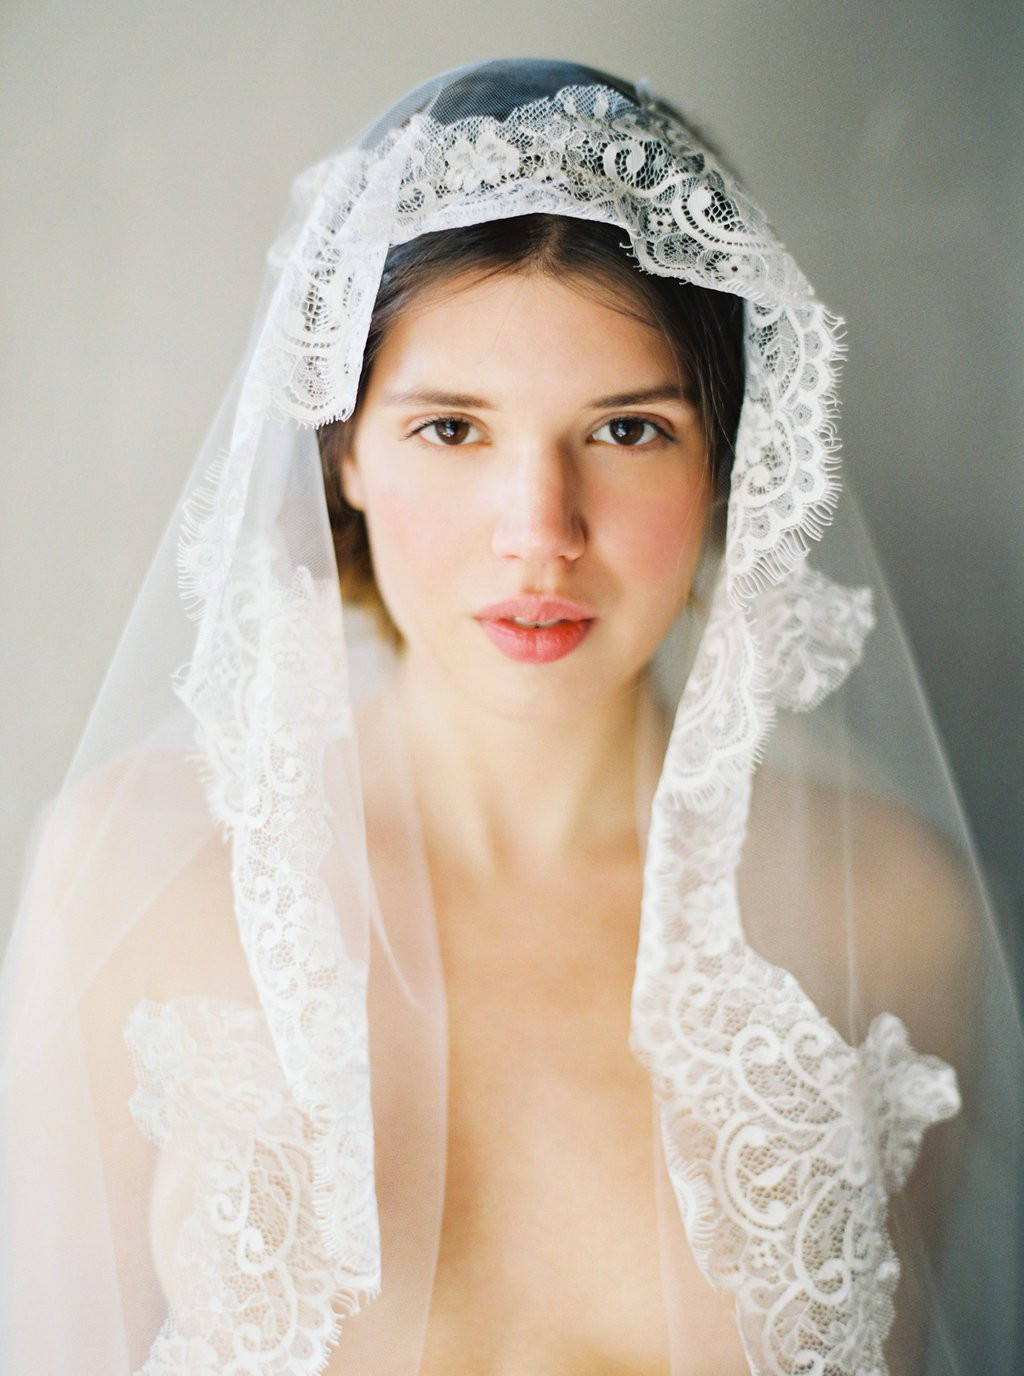 Cathedral Style Wedding Veils
 Cathedral Length Chantilly Lace Wedding Veil ‘Forestyne’